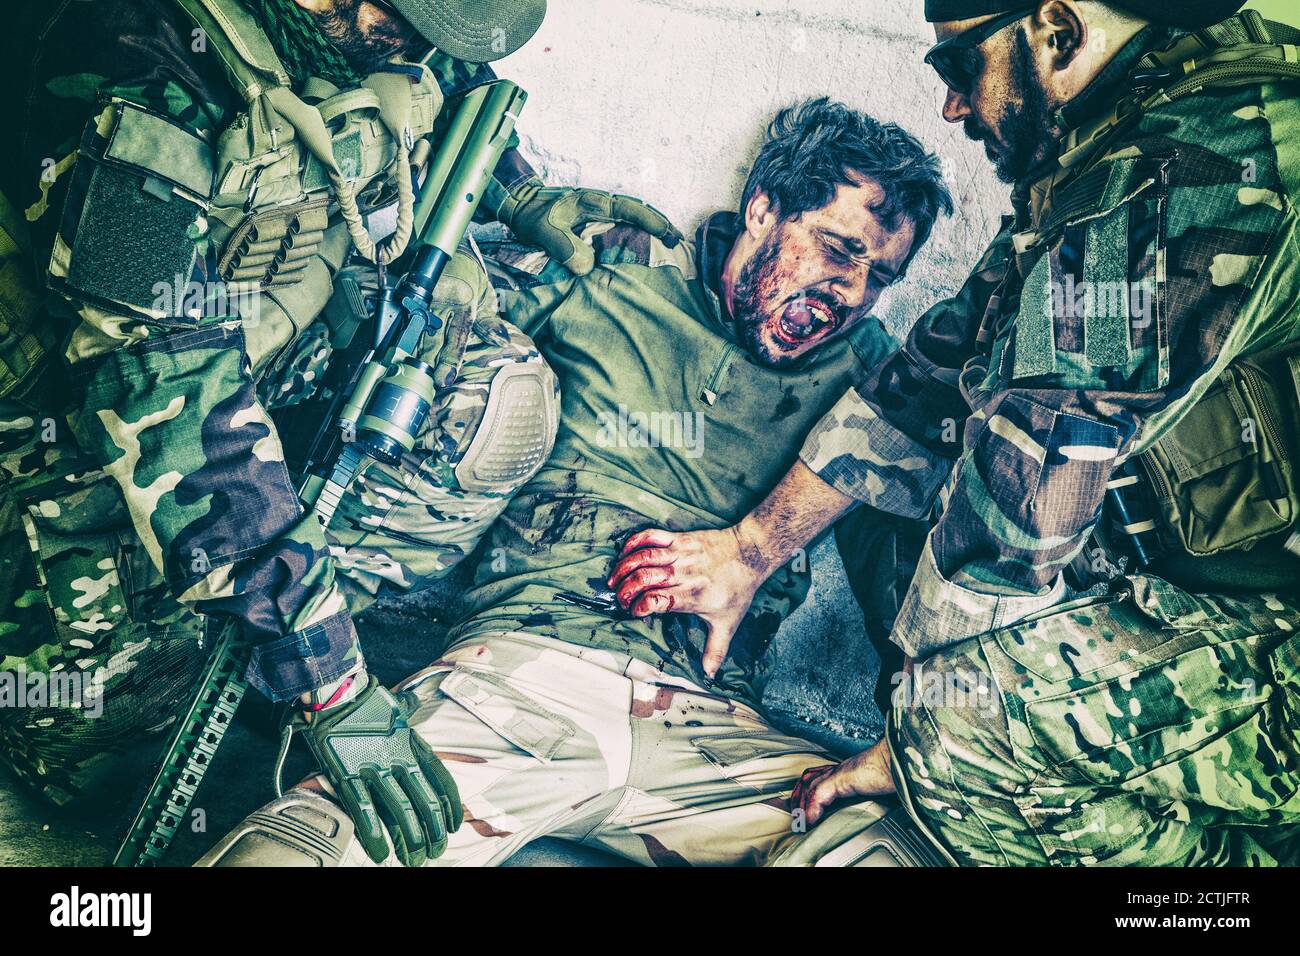 Commando fighters, Navy SEALs infantrymen giving emergency help to wounded comrade on battlefield. Soldier screaming in pain while teammate trying to stop bleeding from gunshot wound in his stomach Stock Photo